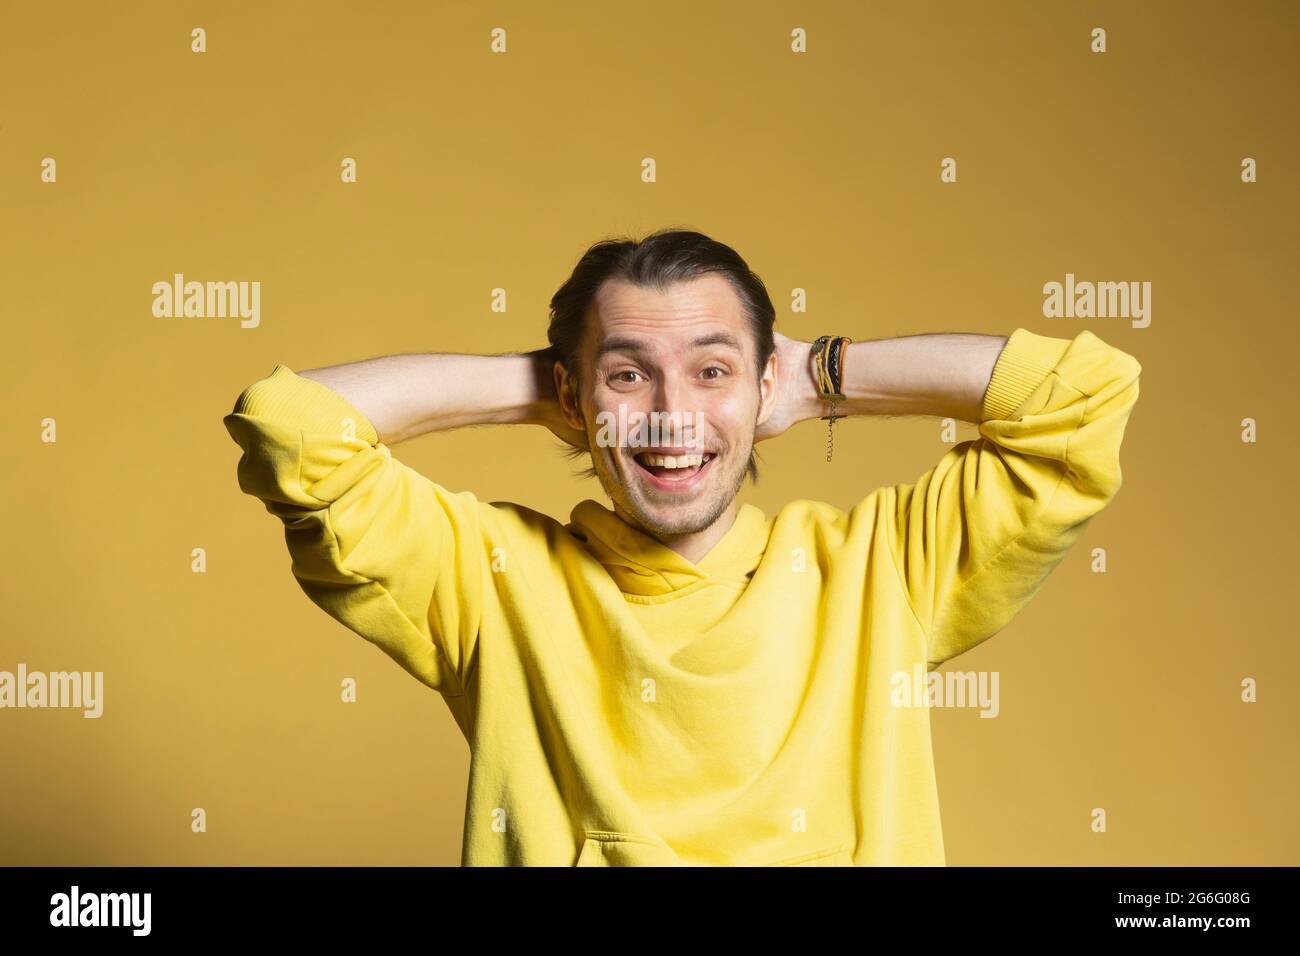 Portrait excited, happy young man on yellow background Stock Photo